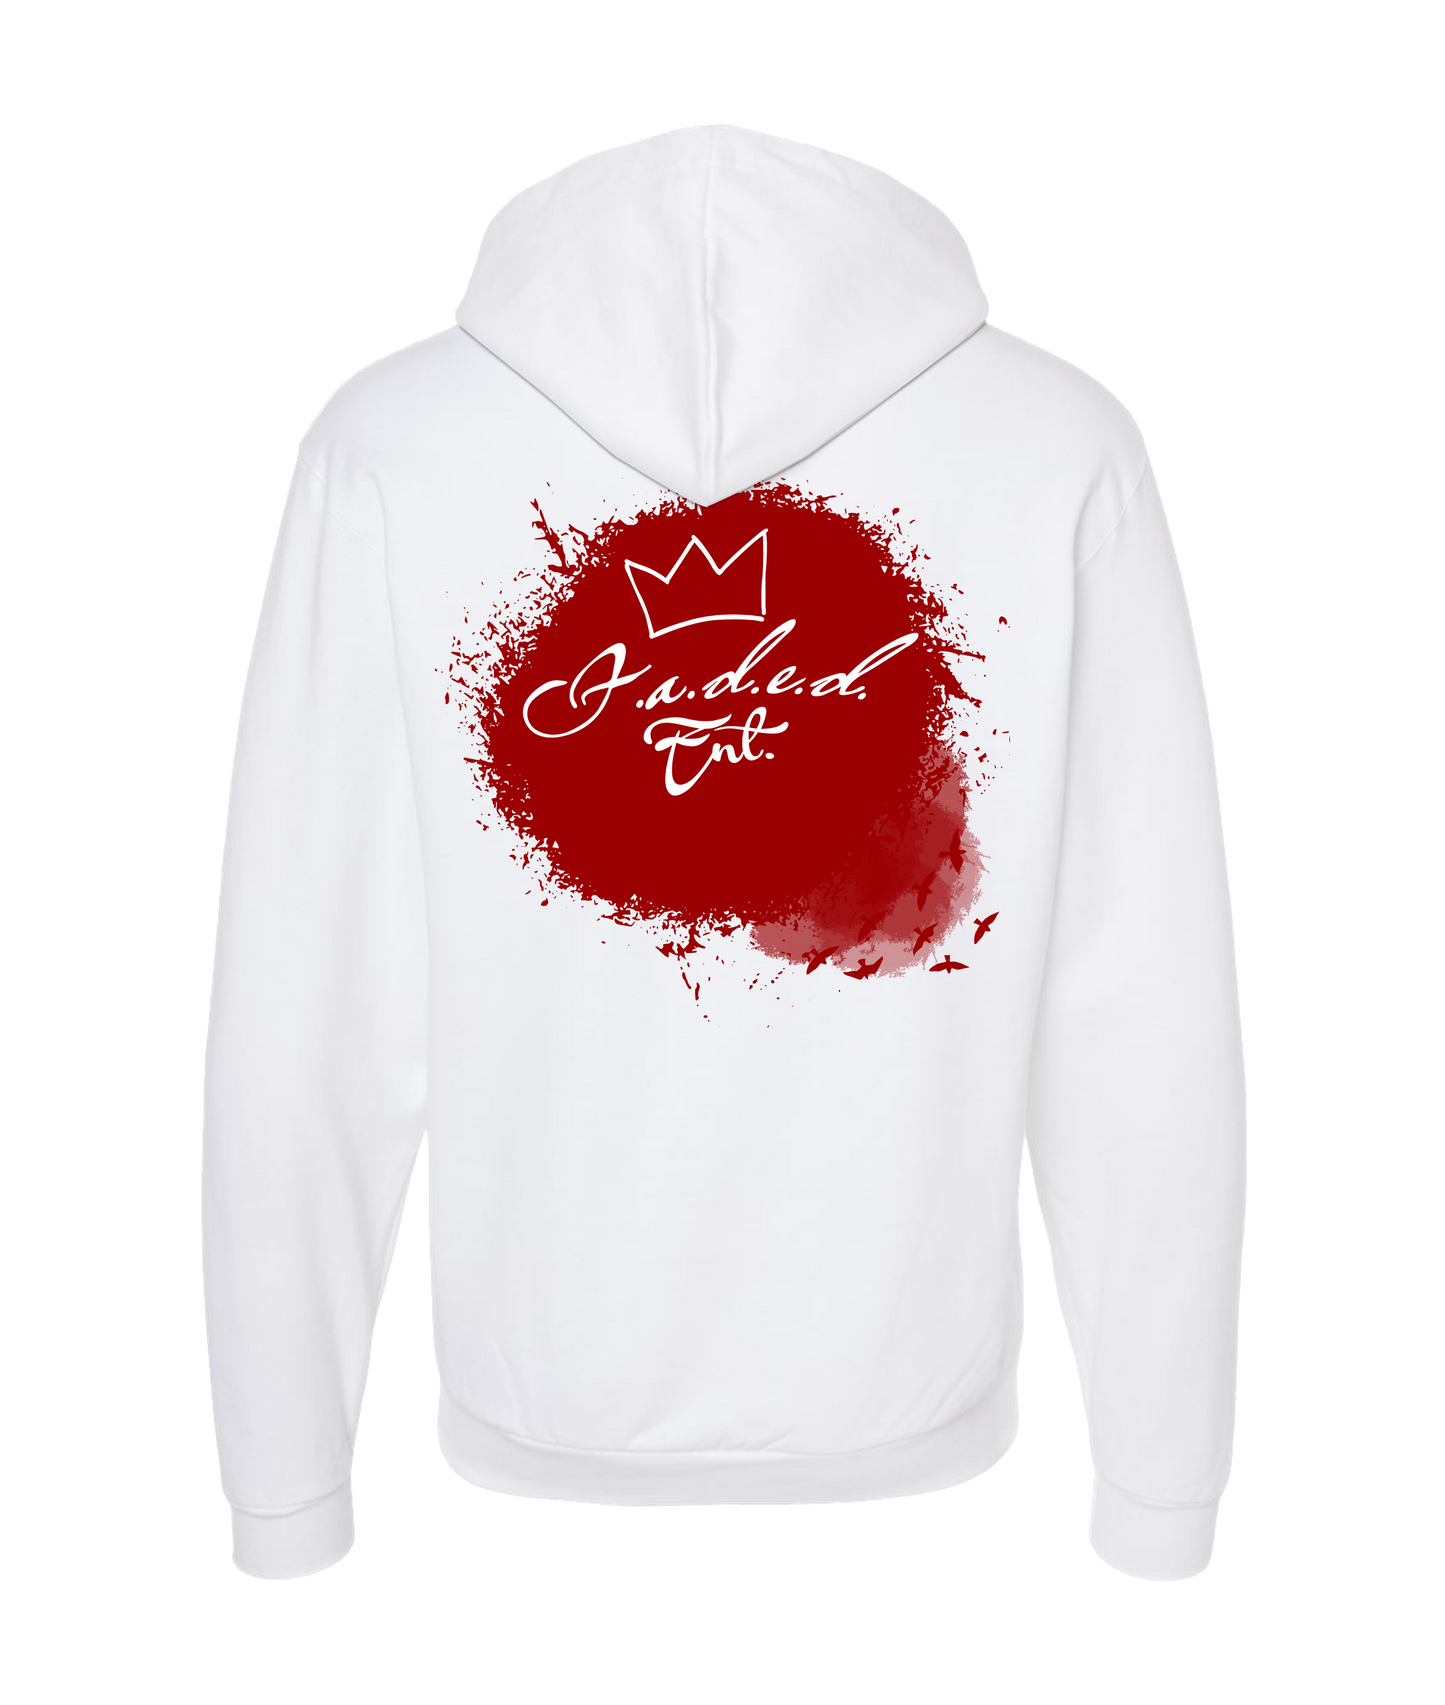 F.A.D.E.D.ENT. - Logo Red - White Zip Up Hoodie